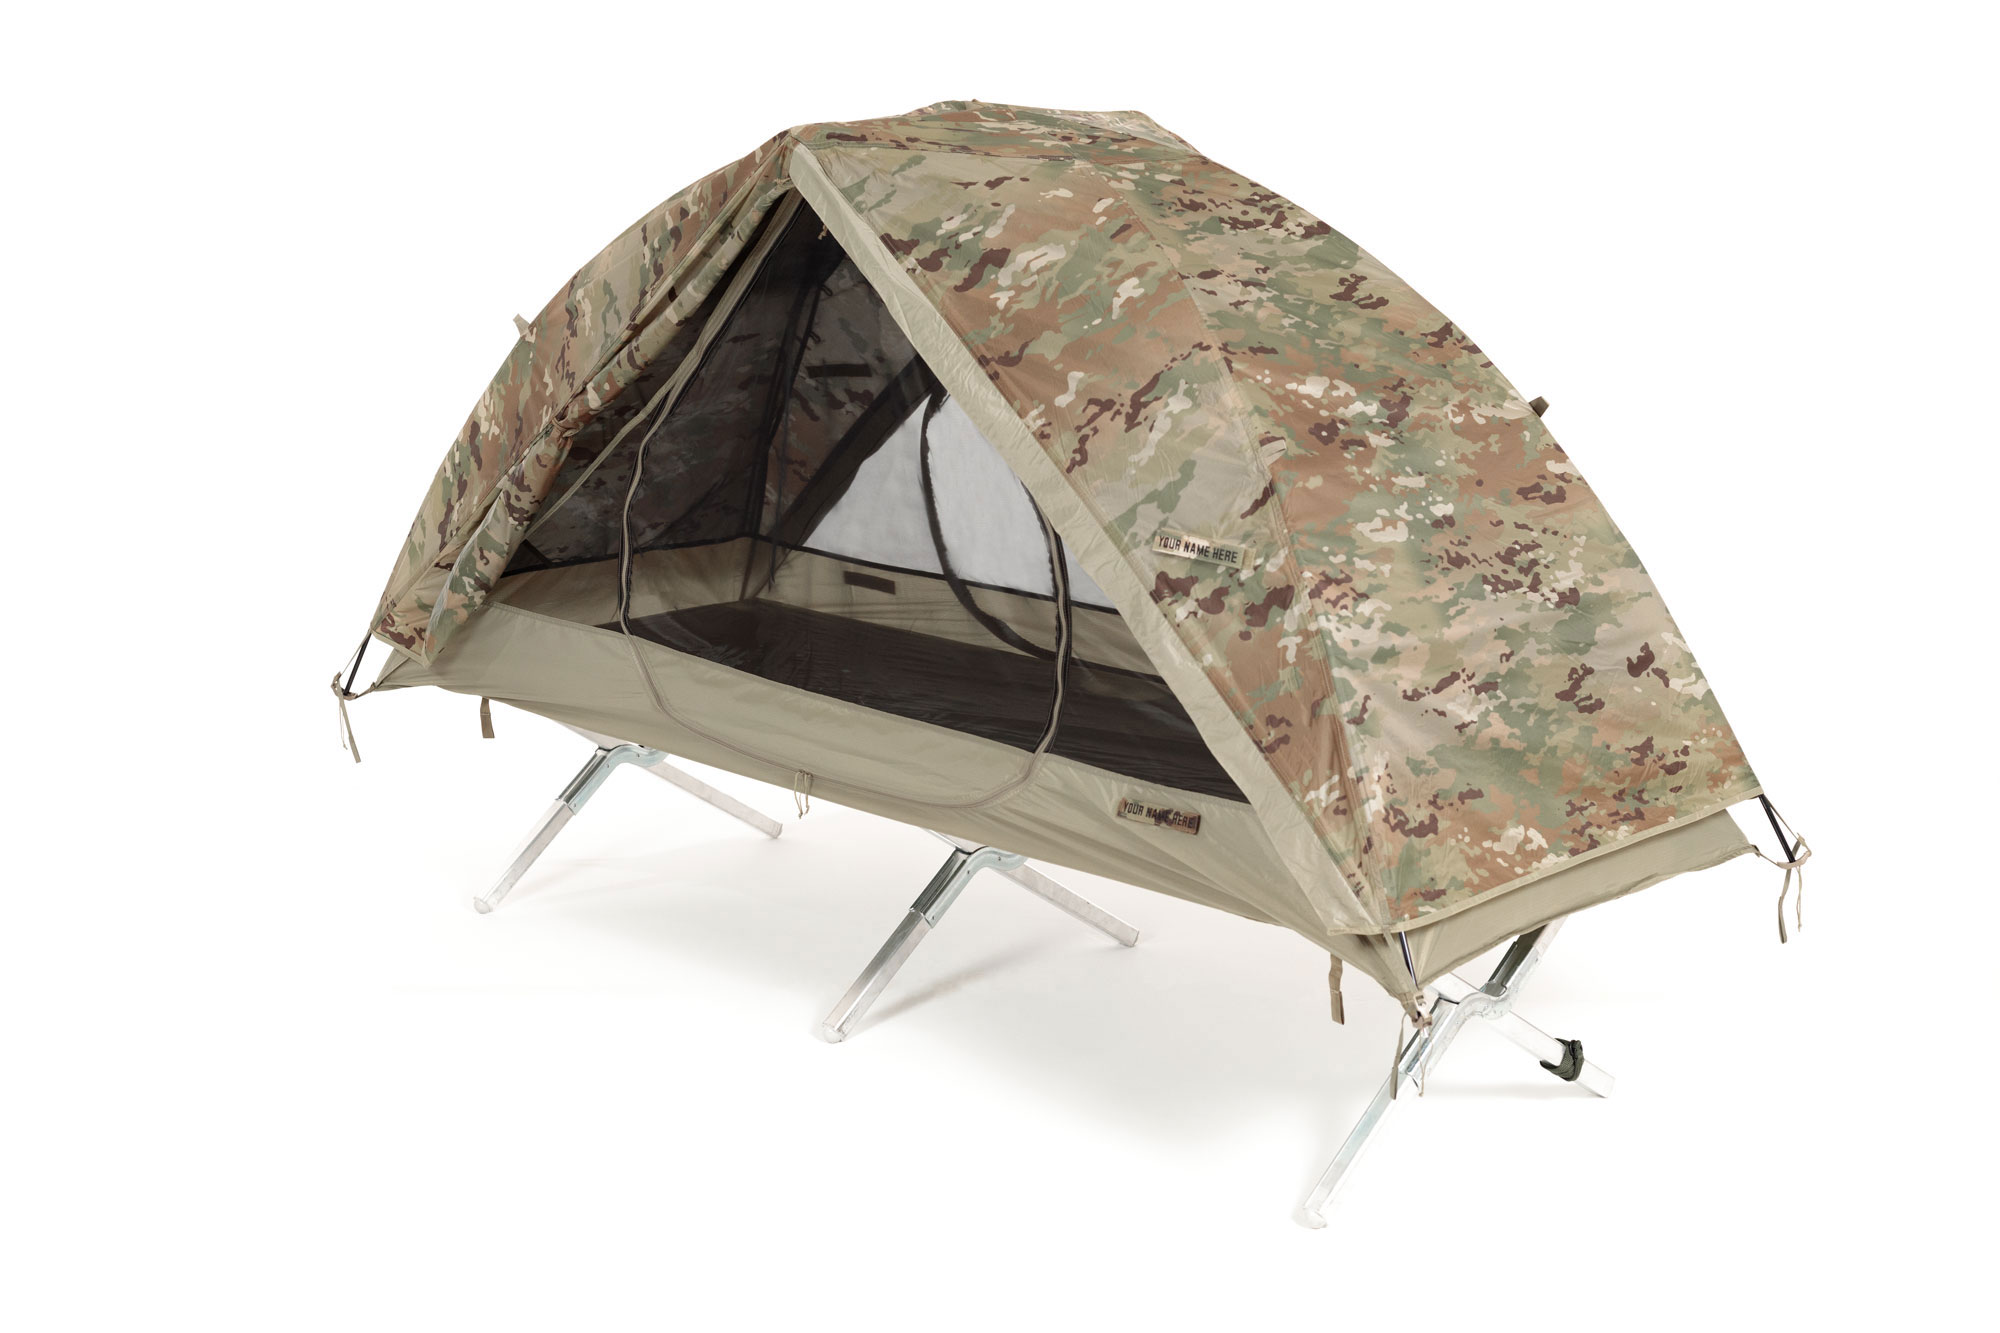 LiteFighter 1 X Series Individual Shelter System – LiteFighter